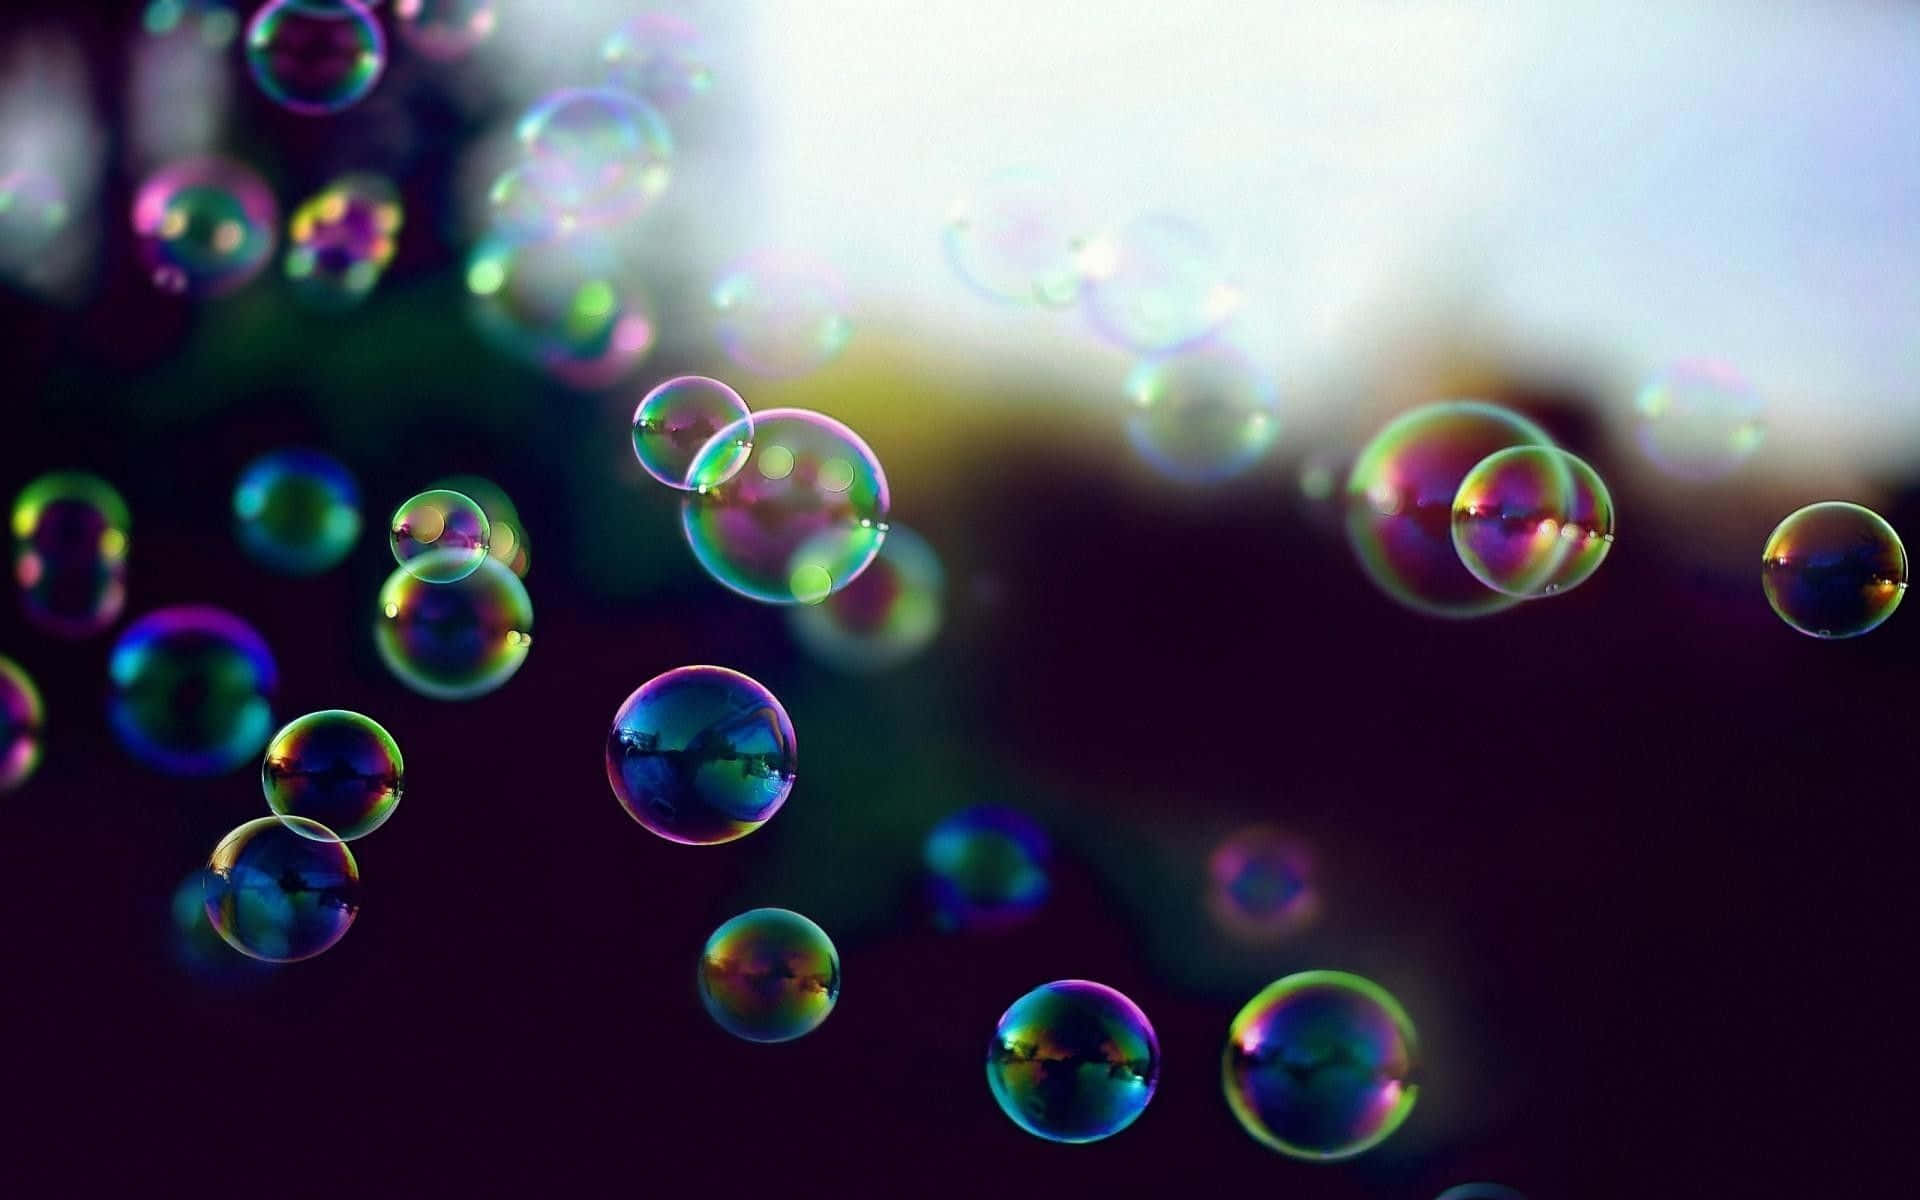 Soap Bubbles Floating In The Air